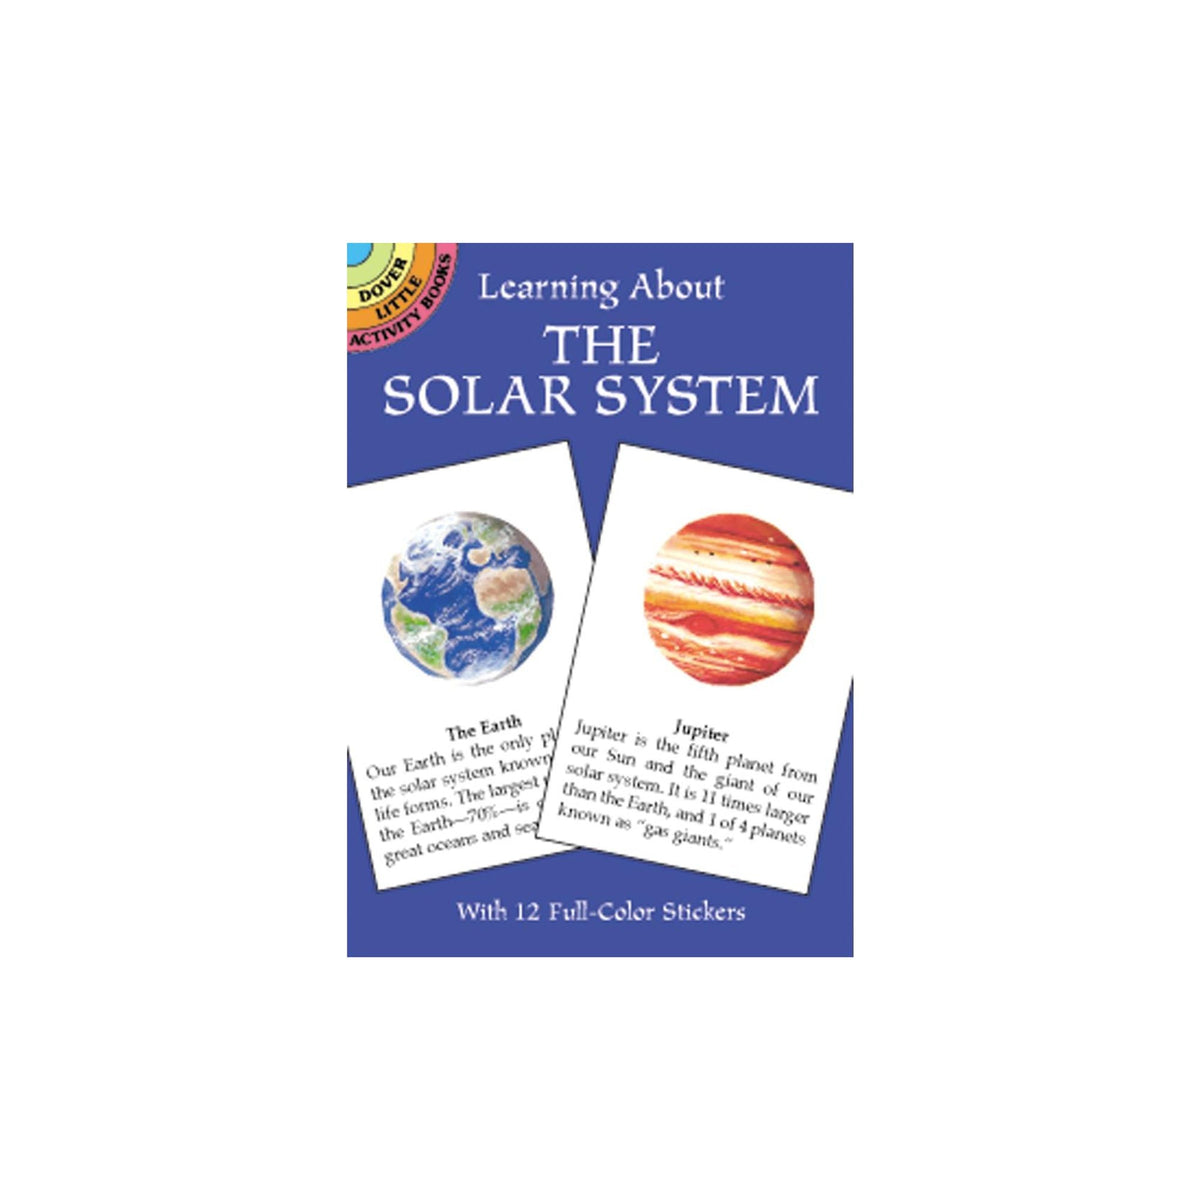 SOLAR SYSTEM FOR KIDS WITH SUN Planet' Sticker